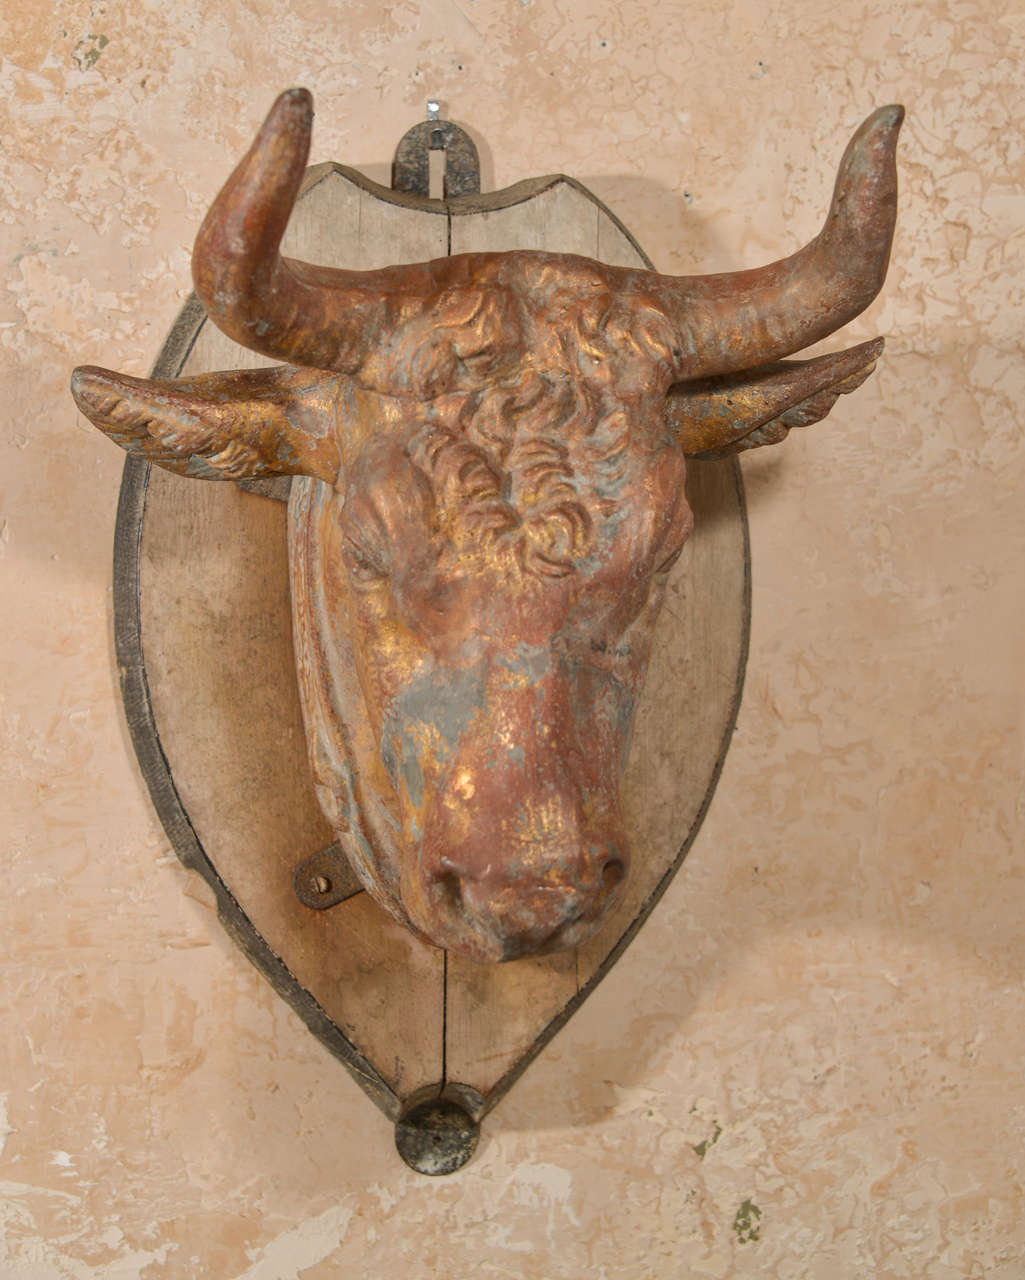 19th c. zinc cow's head from France with wooden plaque.
Has traces of gold leaf.